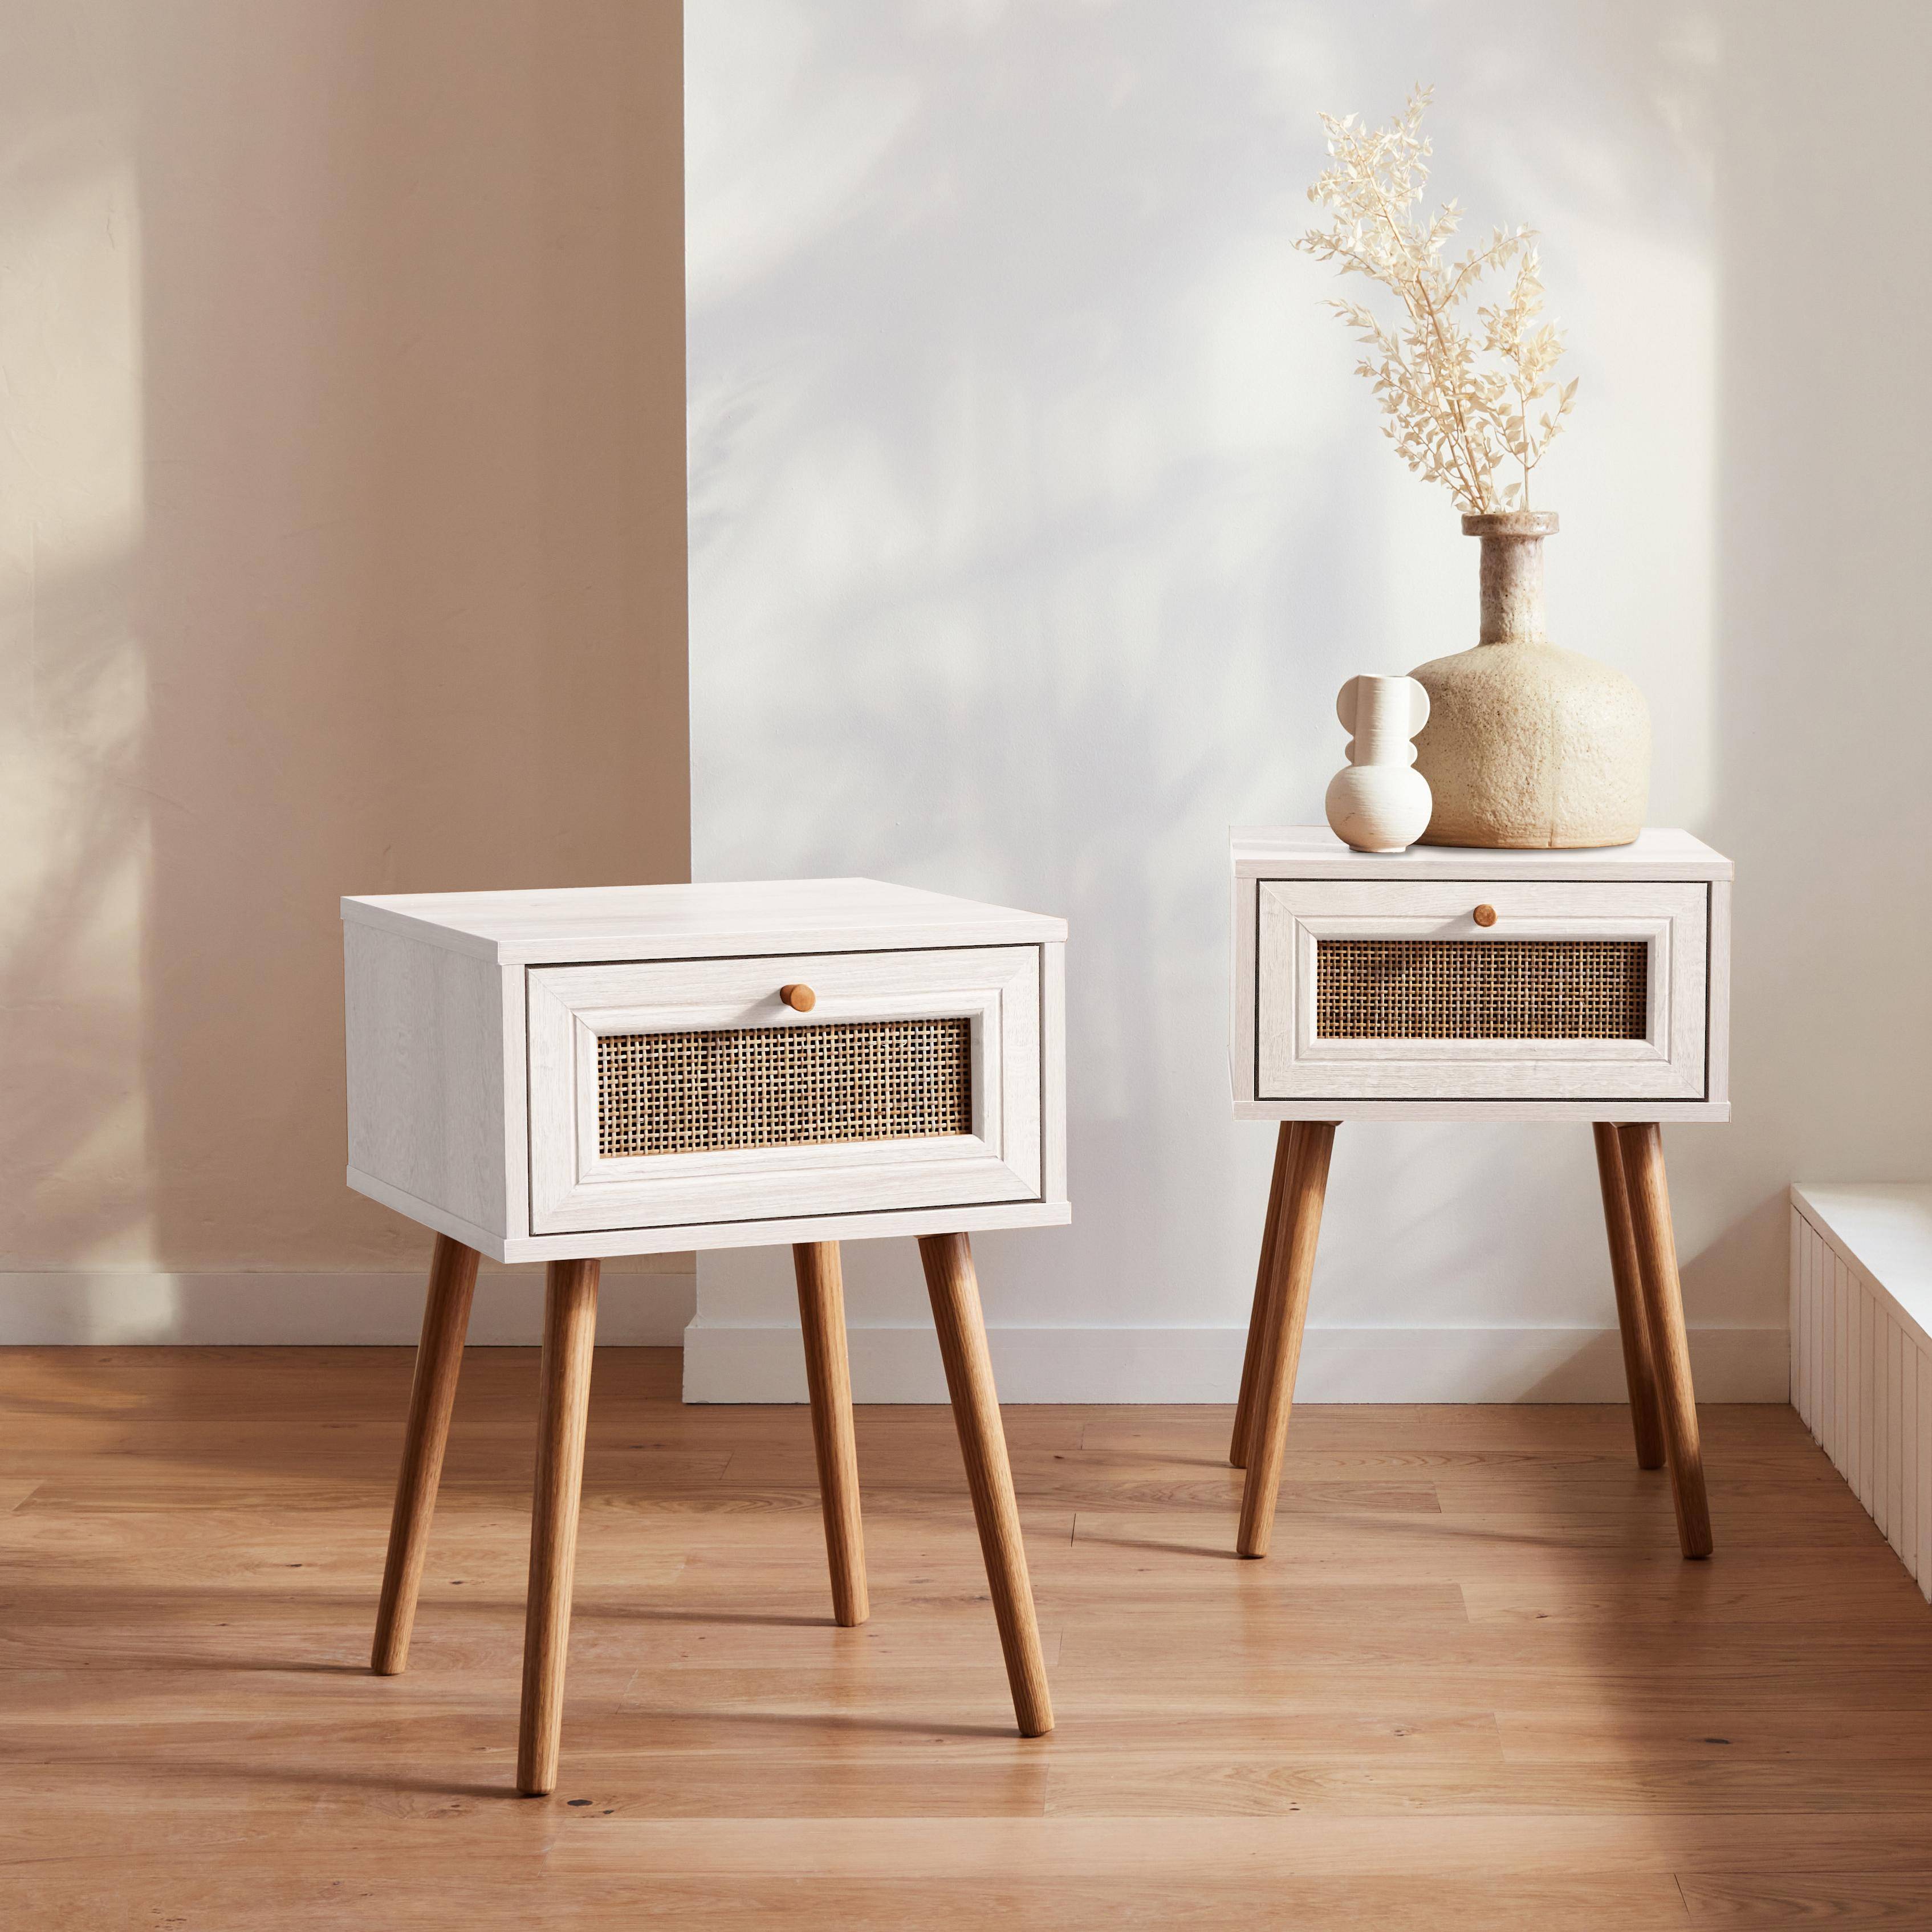 Set of 2 white wood and cane effect bedside tables with 1 drawer,sweeek,Photo1